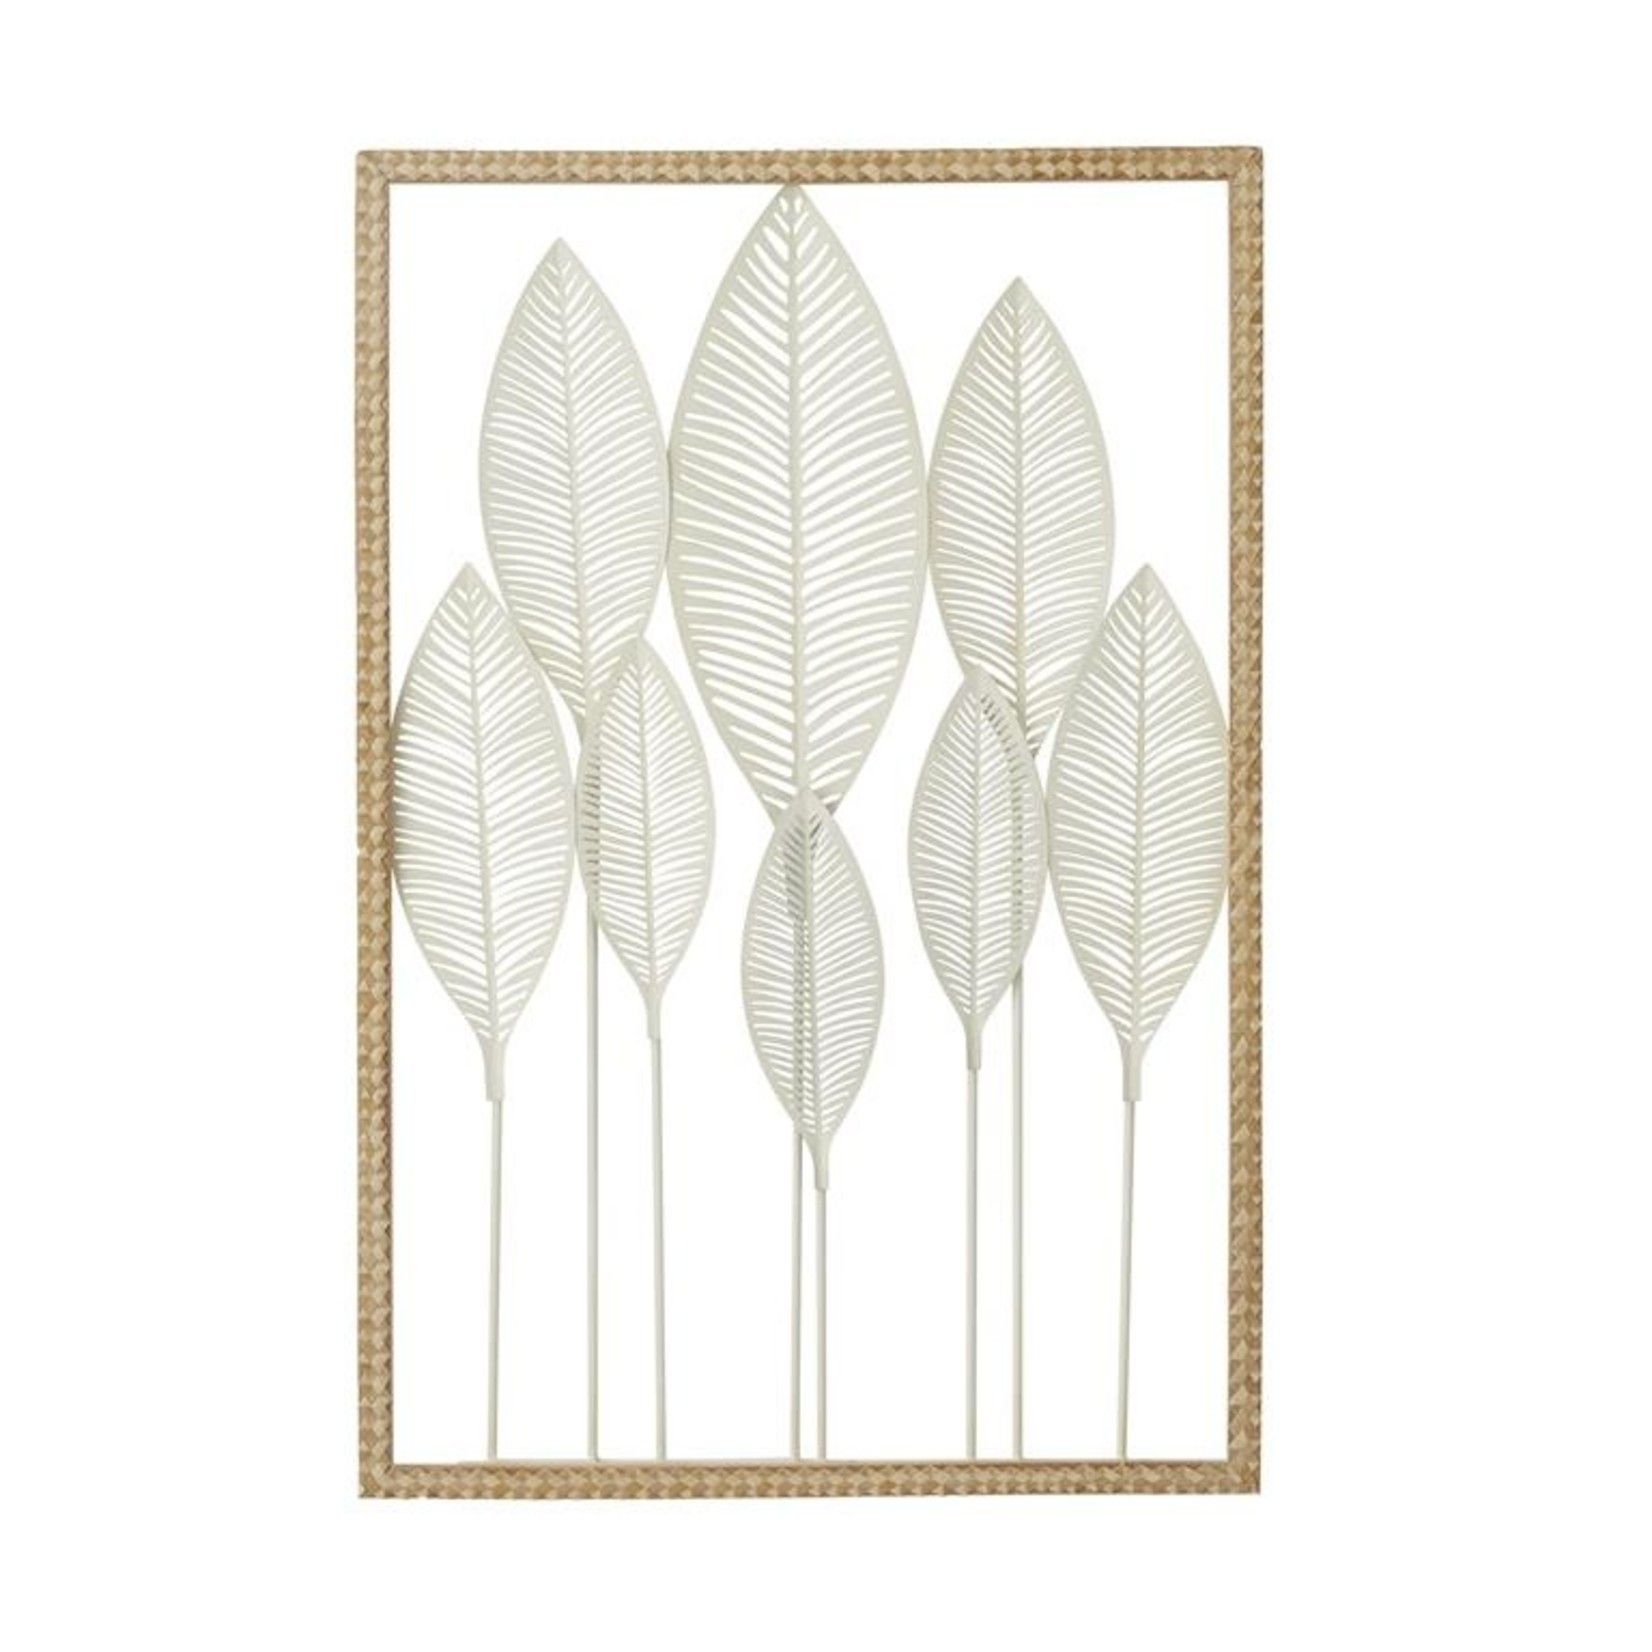 White Metal Leaf Tall Cut Out Wall Decor – Rod Works Lehi Intended For Most Recent Tall Cut Out Leaf Wall Art (View 10 of 20)